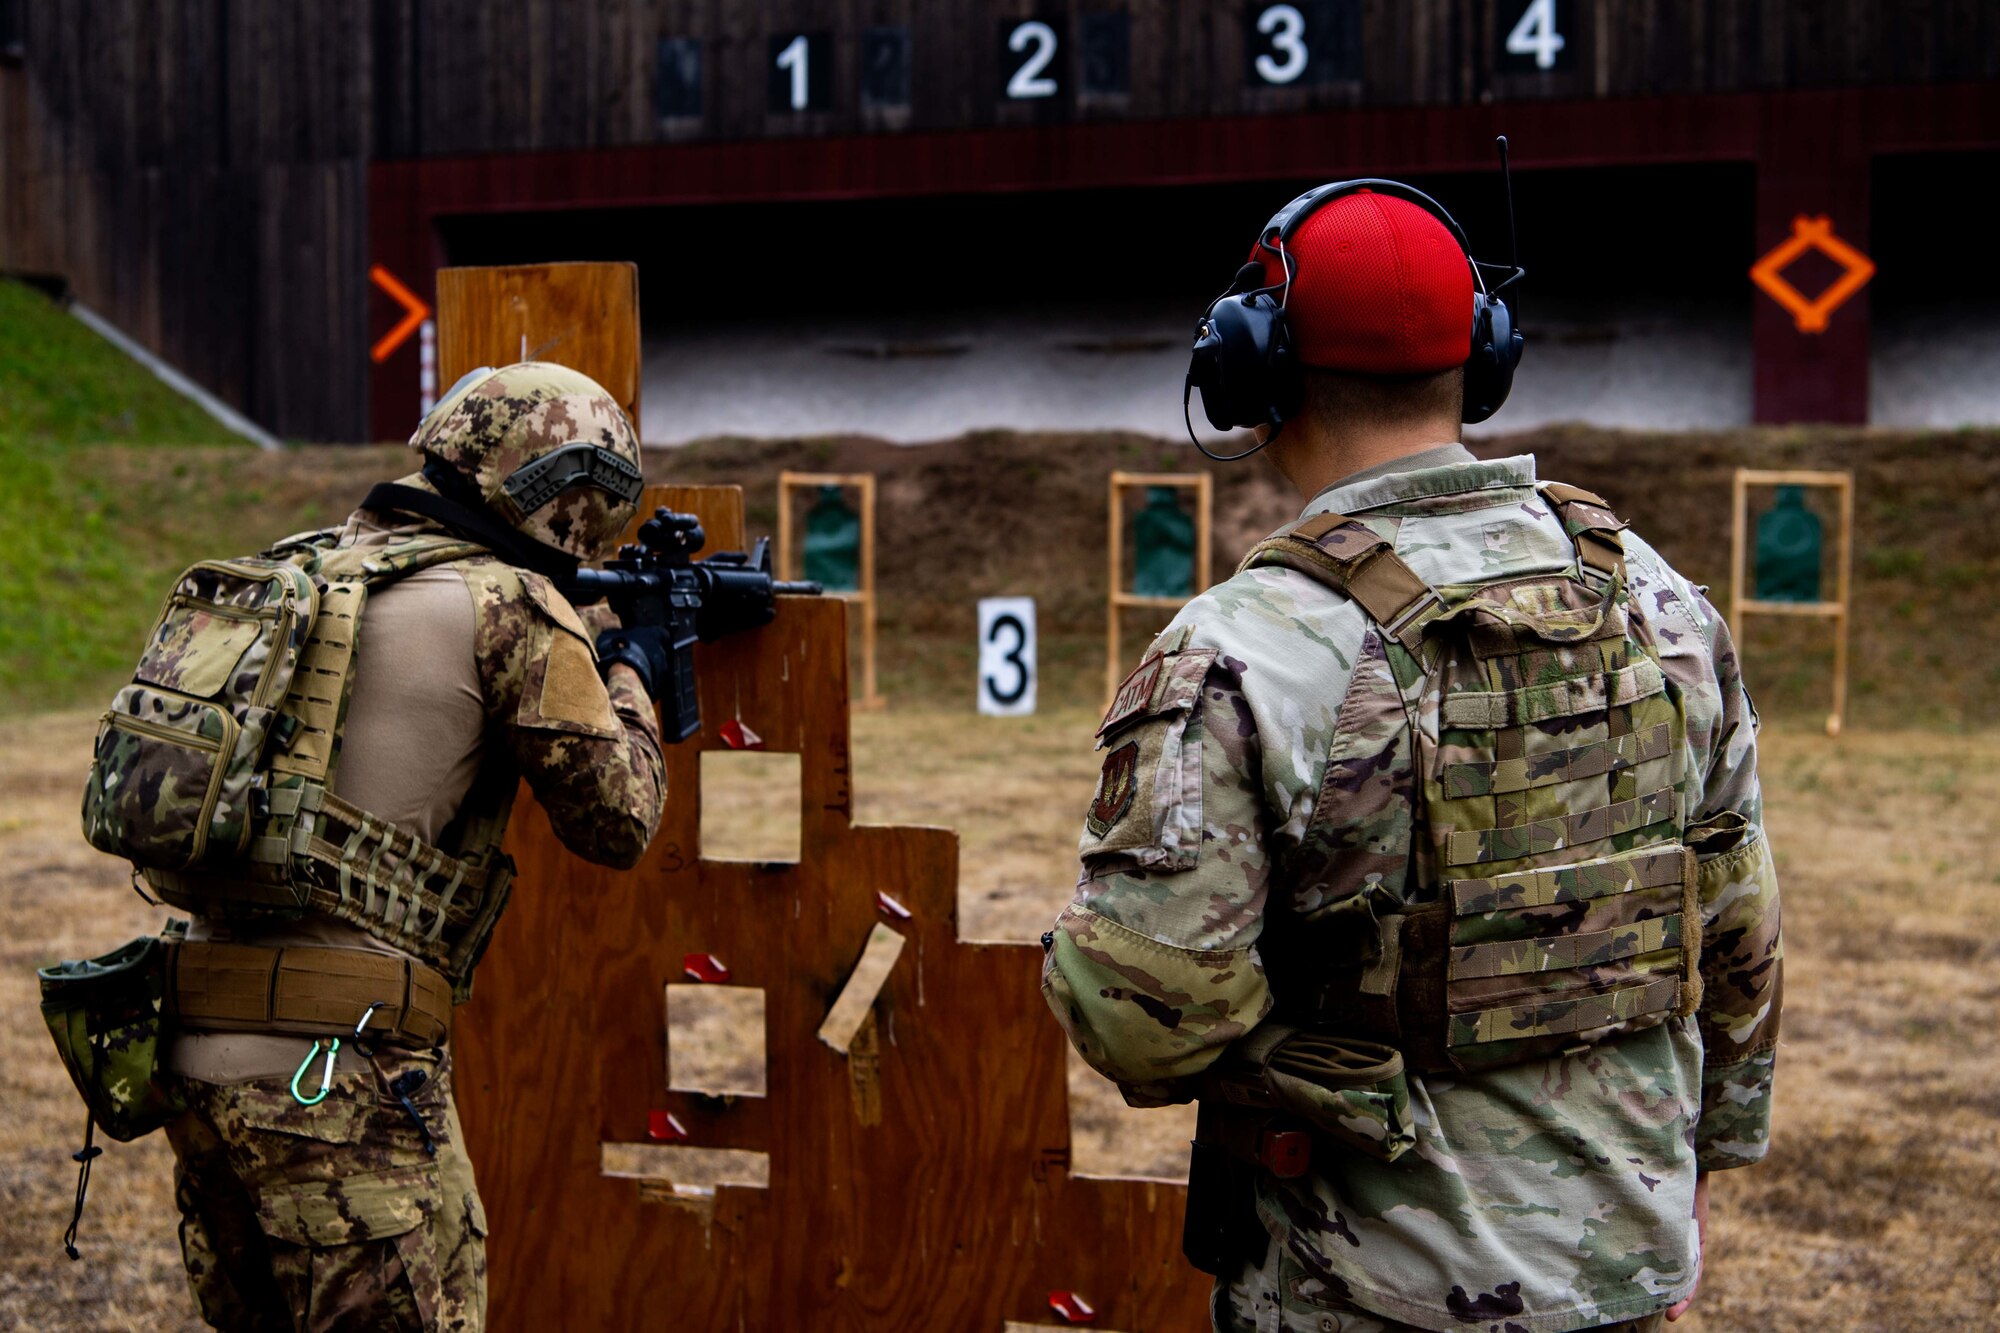 435th Security Forces Squadron instructor, assist students during training